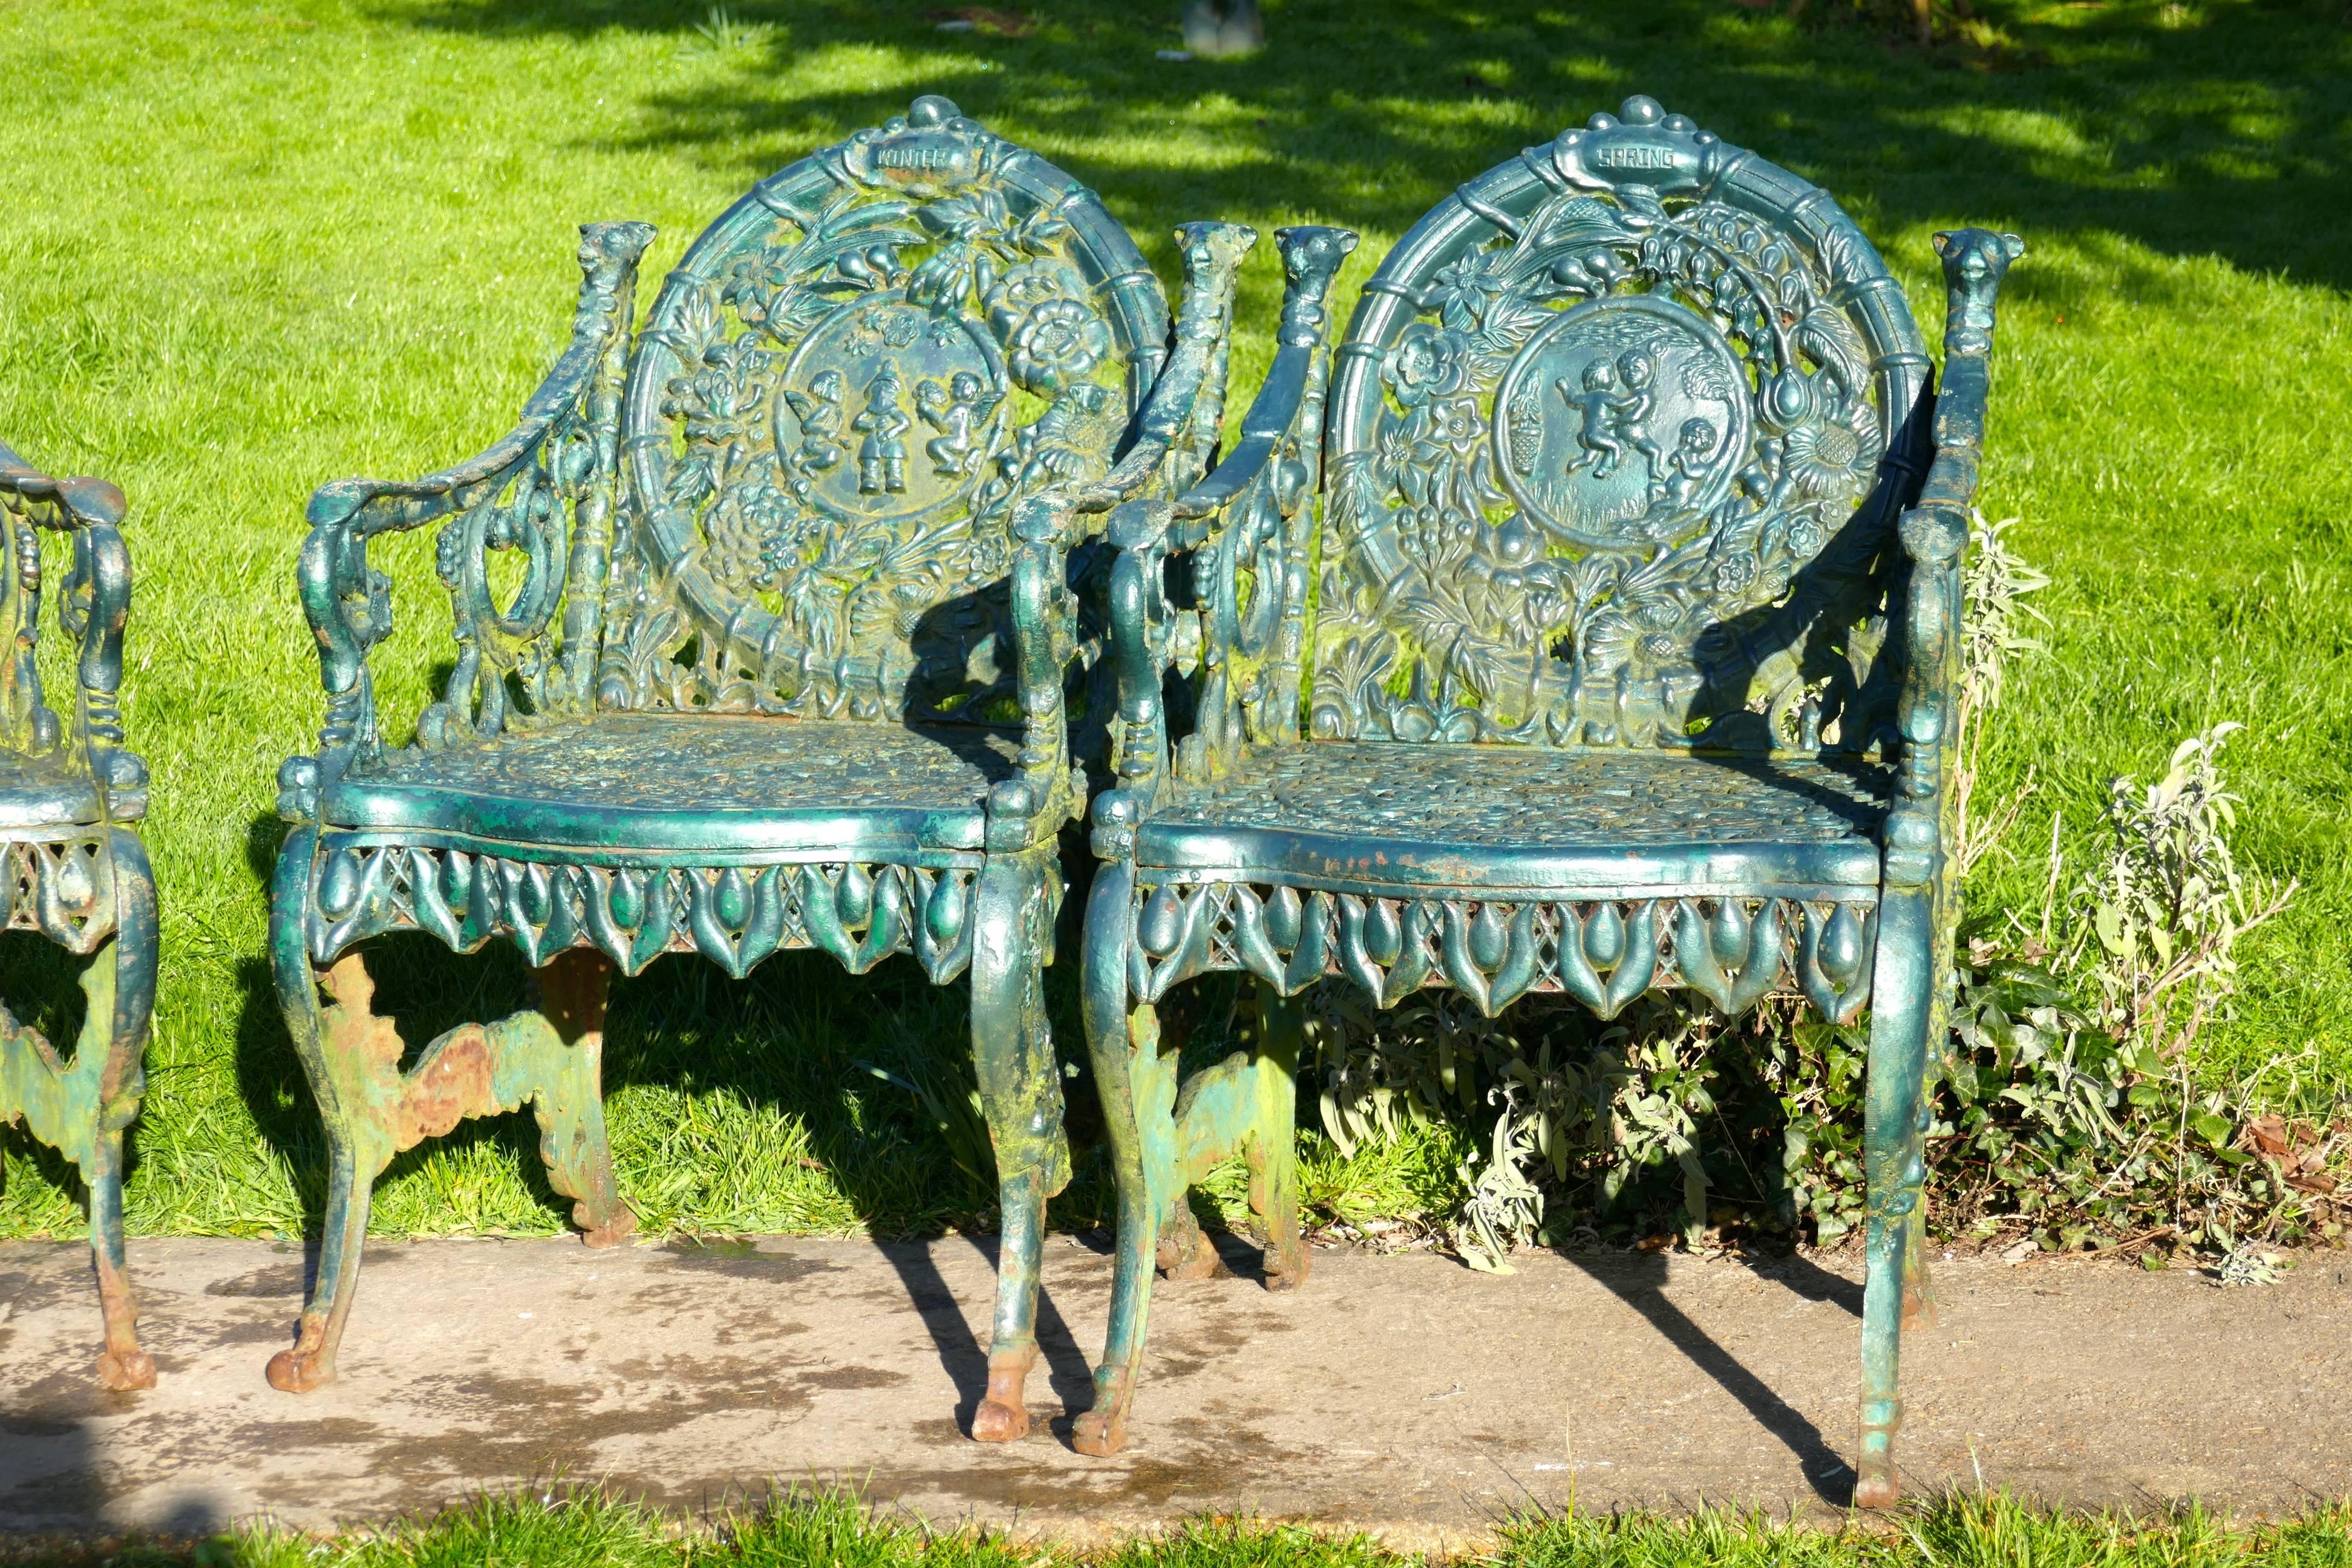 Mid-20th Century Set of Four Cast Iron Garden Armchairs, Four Seasons Plaques on the Backs